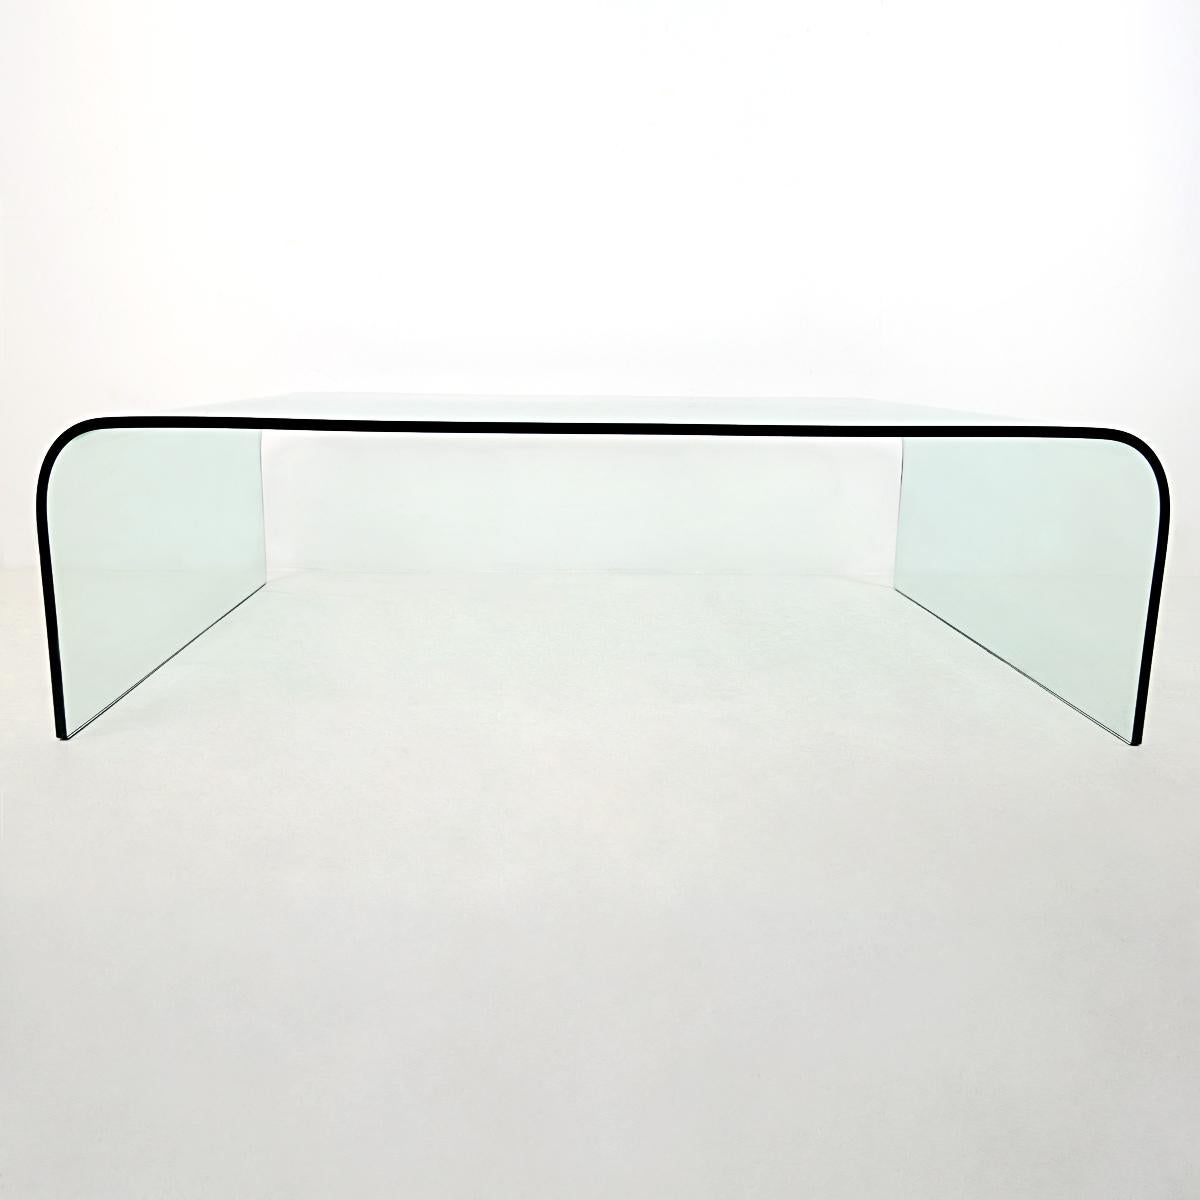 The glass coffee table waterfall was designed by Angelo Cortesi for Fiam Italia. This is the extra wide version. This elegant yet solid and spacious table is made of thick curved glass.